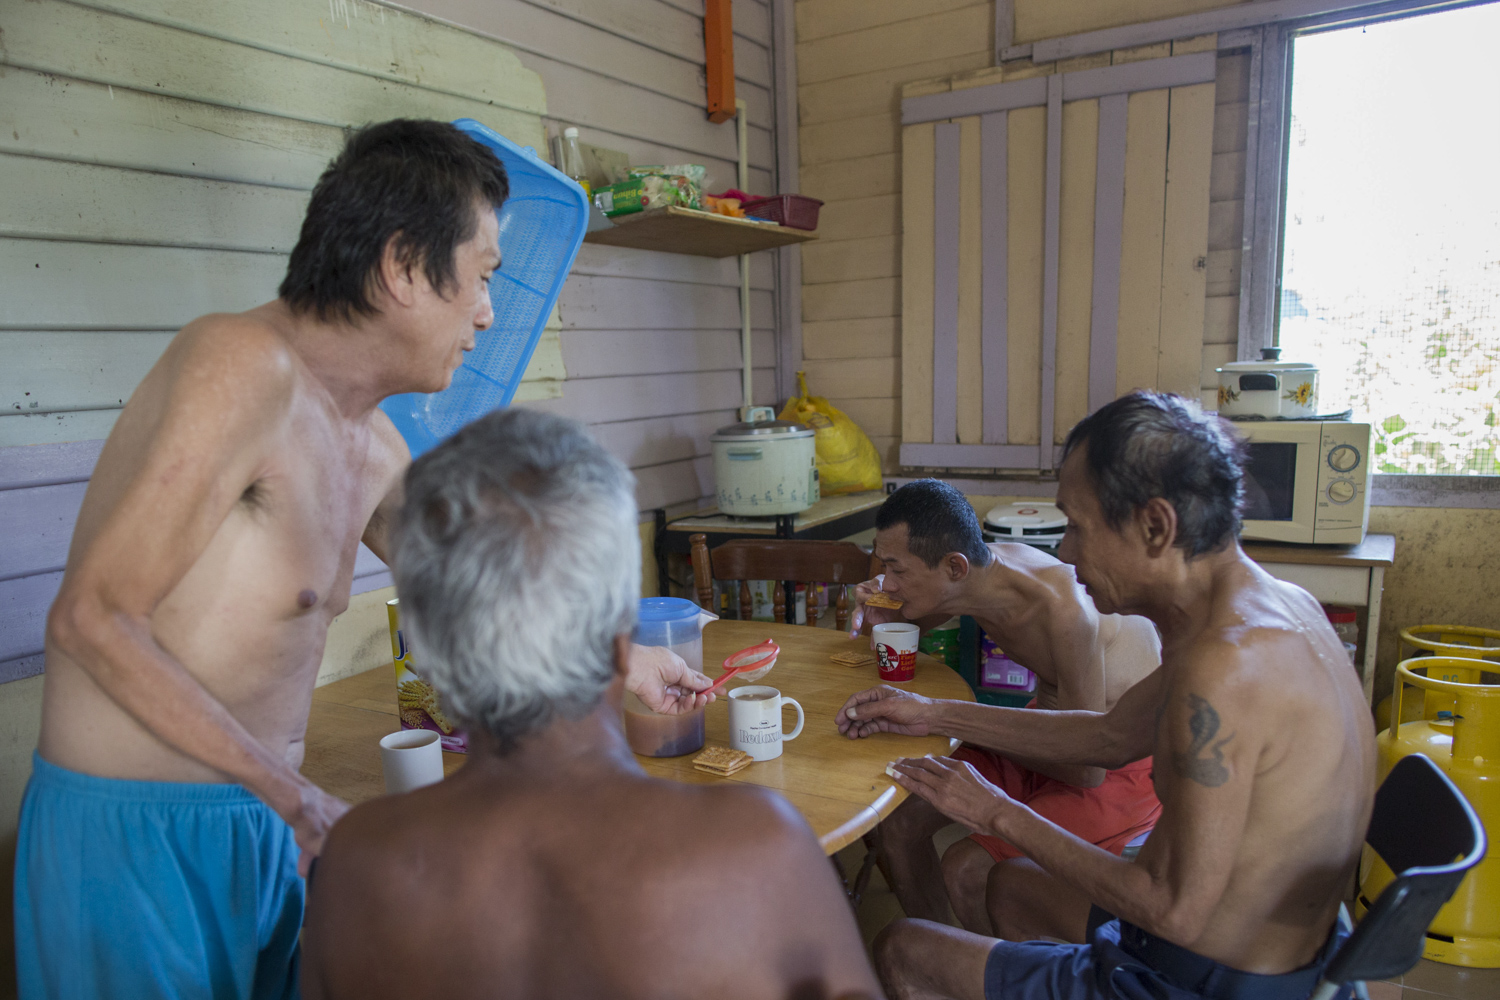 PLC houses older residents at a smaller bungalow, where they enjoy the comforts of sharing meals together at the communal dining table. They divide responsibilities such as cooking and cleaning the house amongst one another.